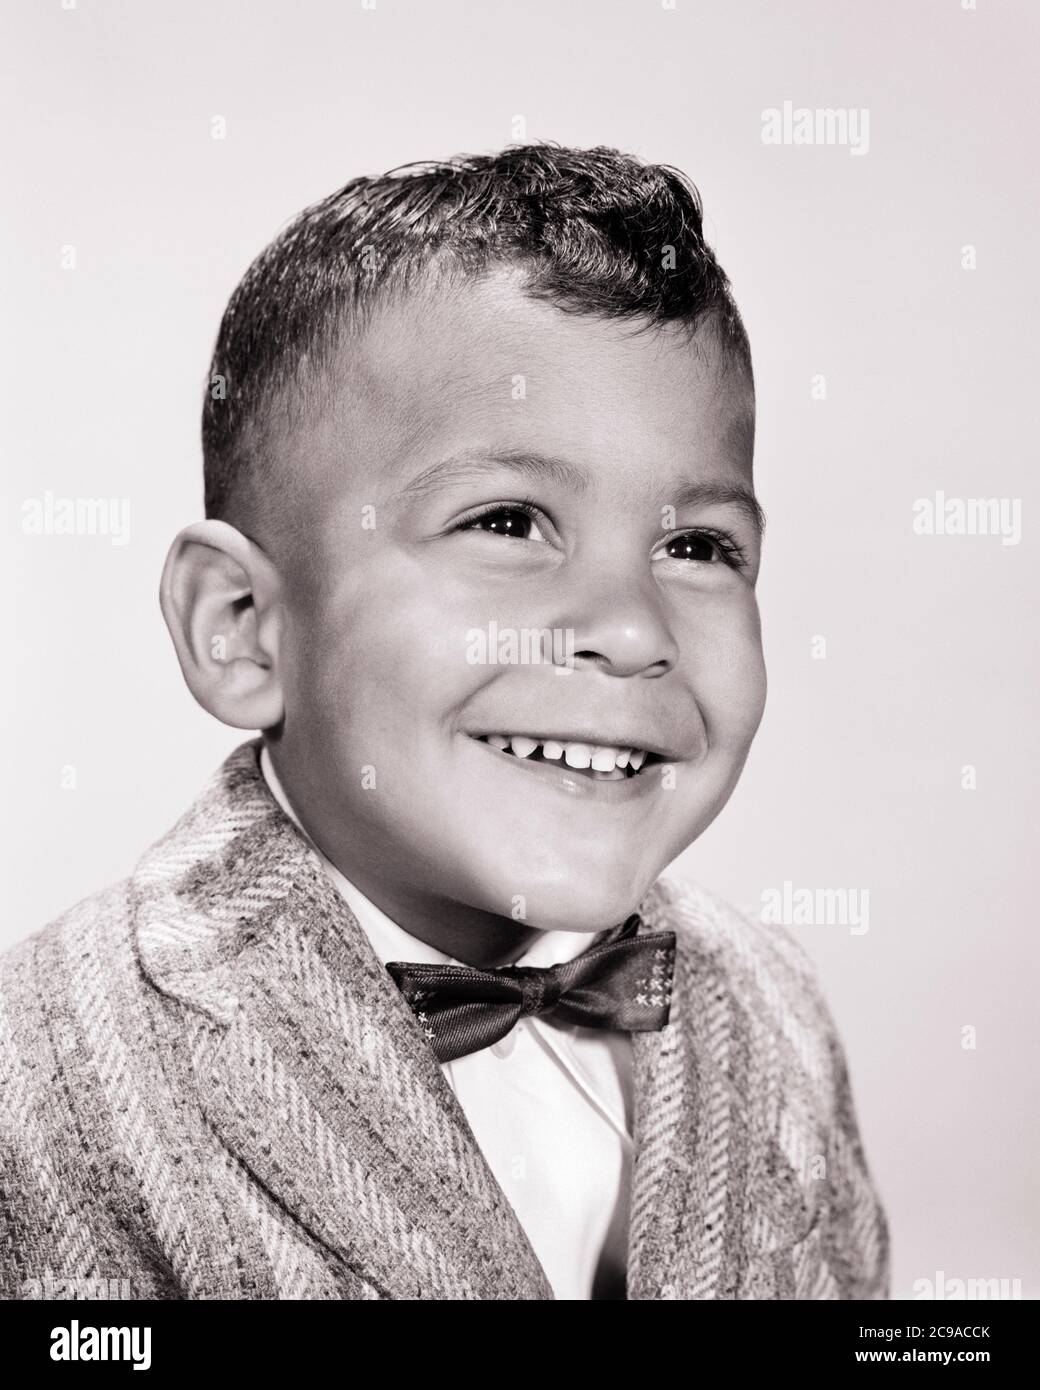 1960s PORTRAIT OF SMILING YOUNG AFRICAN-AMERICAN BOY WEARING SPORTS JACKET AND BOW TIE - n1701 HAR001 HARS AND BLACK ETHNICITY PRIDE SMILES CONNECTION JOYFUL STYLISH CHARMING COOPERATION JUVENILES PERSONABLE BLACK AND WHITE HAR001 OLD FASHIONED AFRICAN AMERICANS Stock Photo